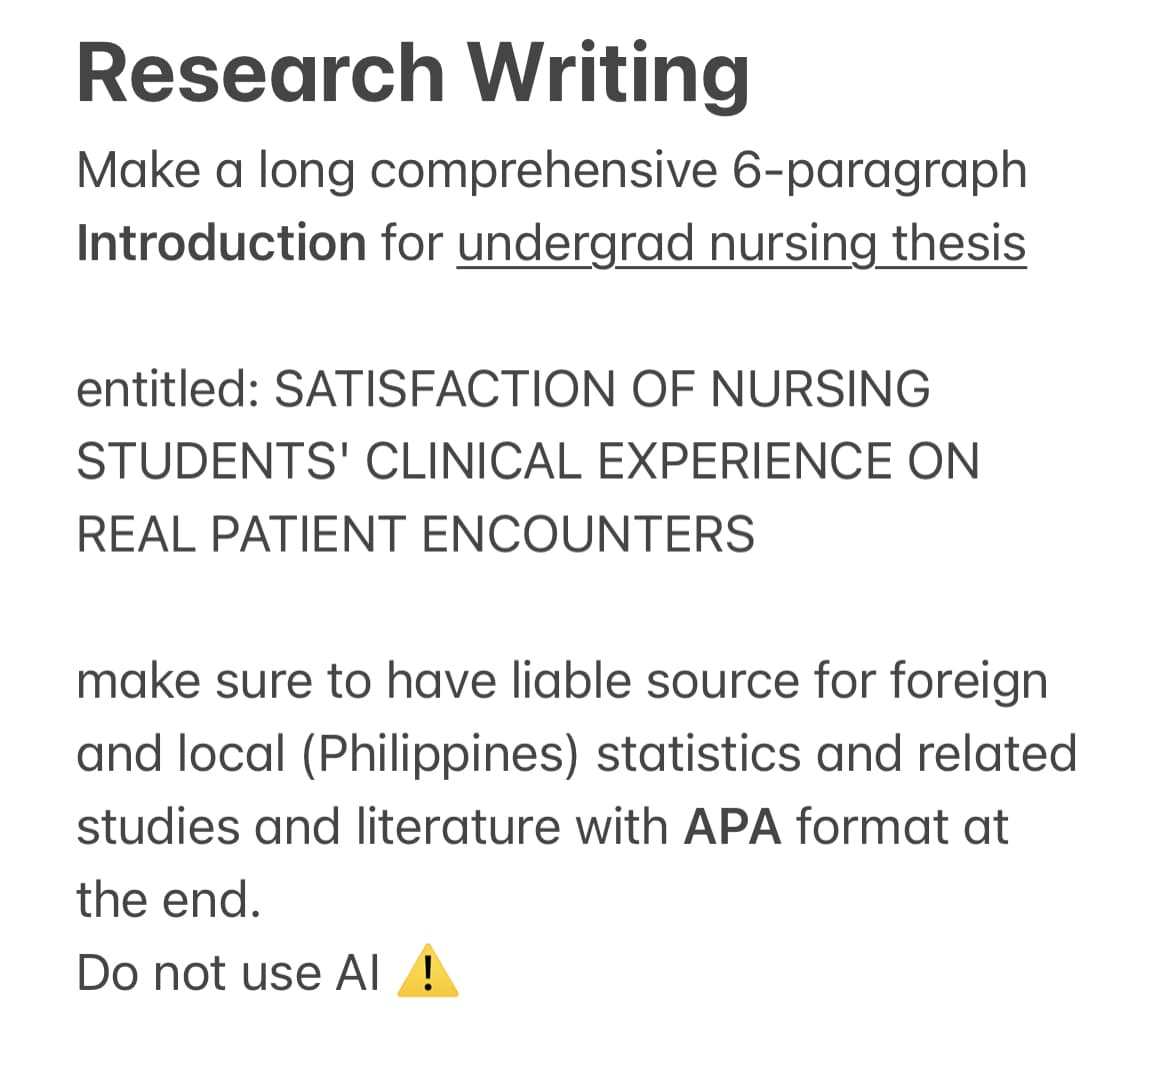 Research Writing
Make a long comprehensive 6-paragraph
Introduction for undergrad nursing thesis
entitled: SATISFACTION OF NURSING
STUDENTS' CLINICAL EXPERIENCE ON
REAL PATIENT ENCOUNTERS
make sure to have liable source for foreign
and local (Philippines) statistics and related
studies and literature with APA format at
the end.
Do not use Al !